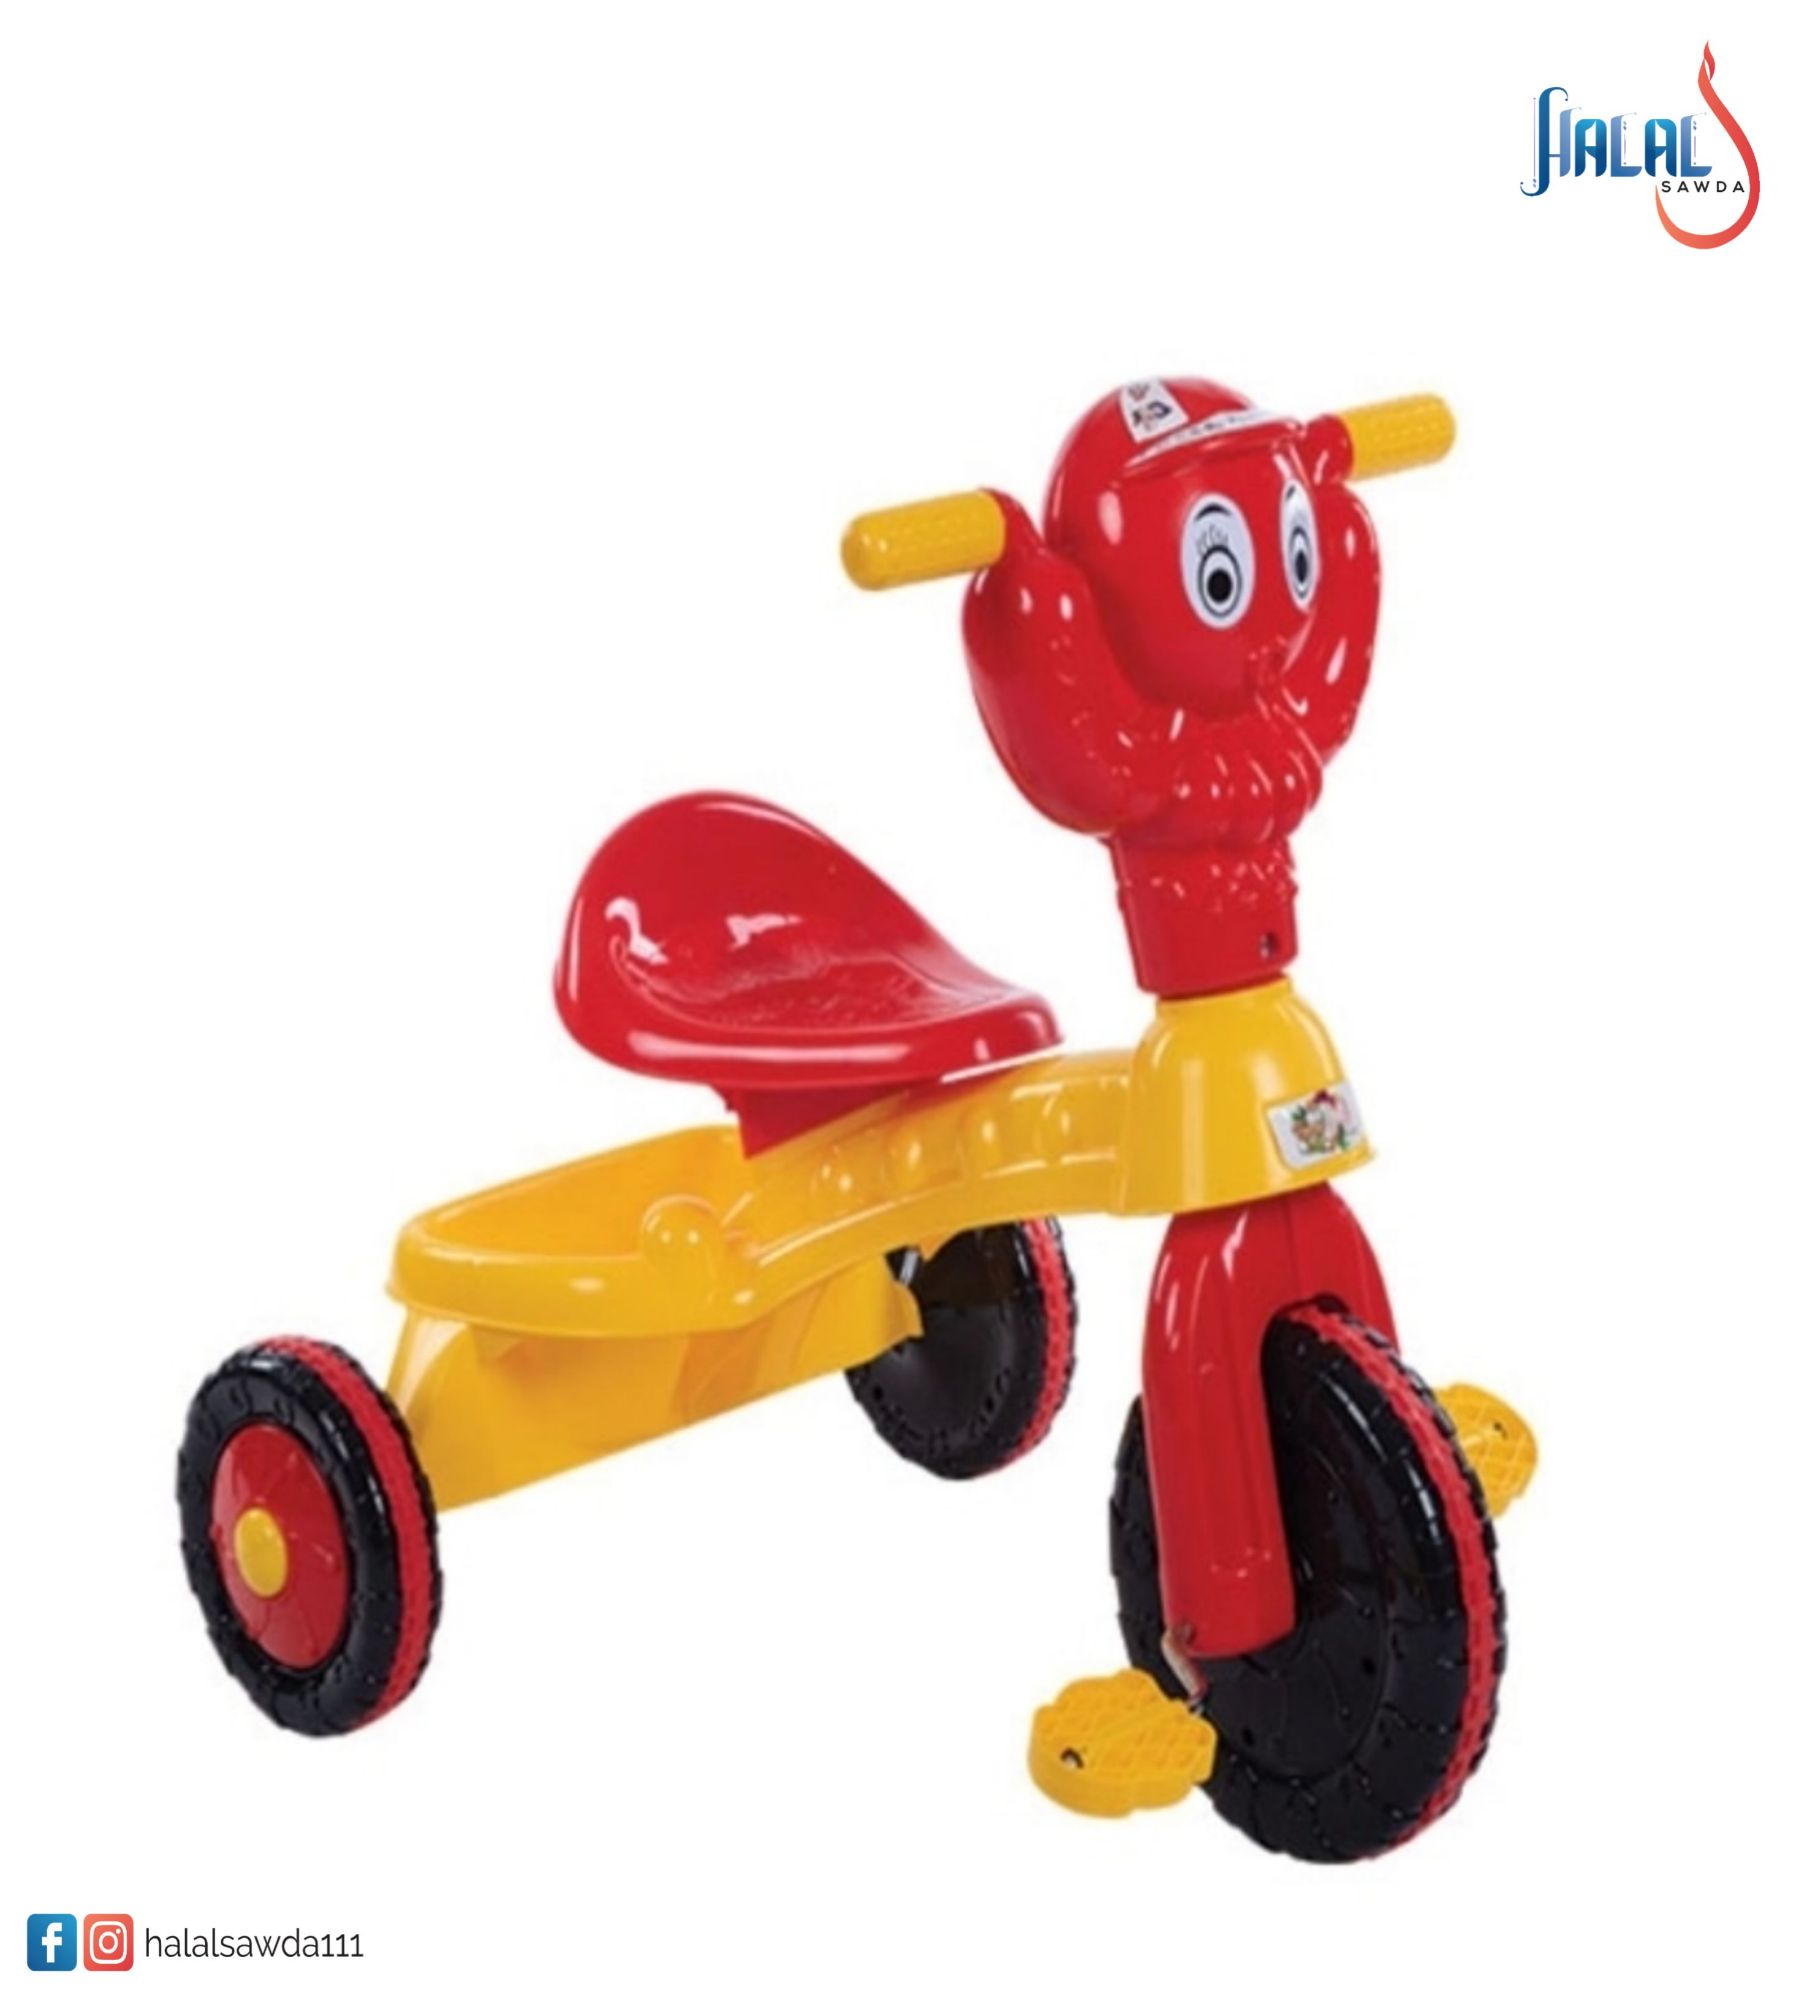 RFL Jim & Jolly Marvel Tricycle Red/Green